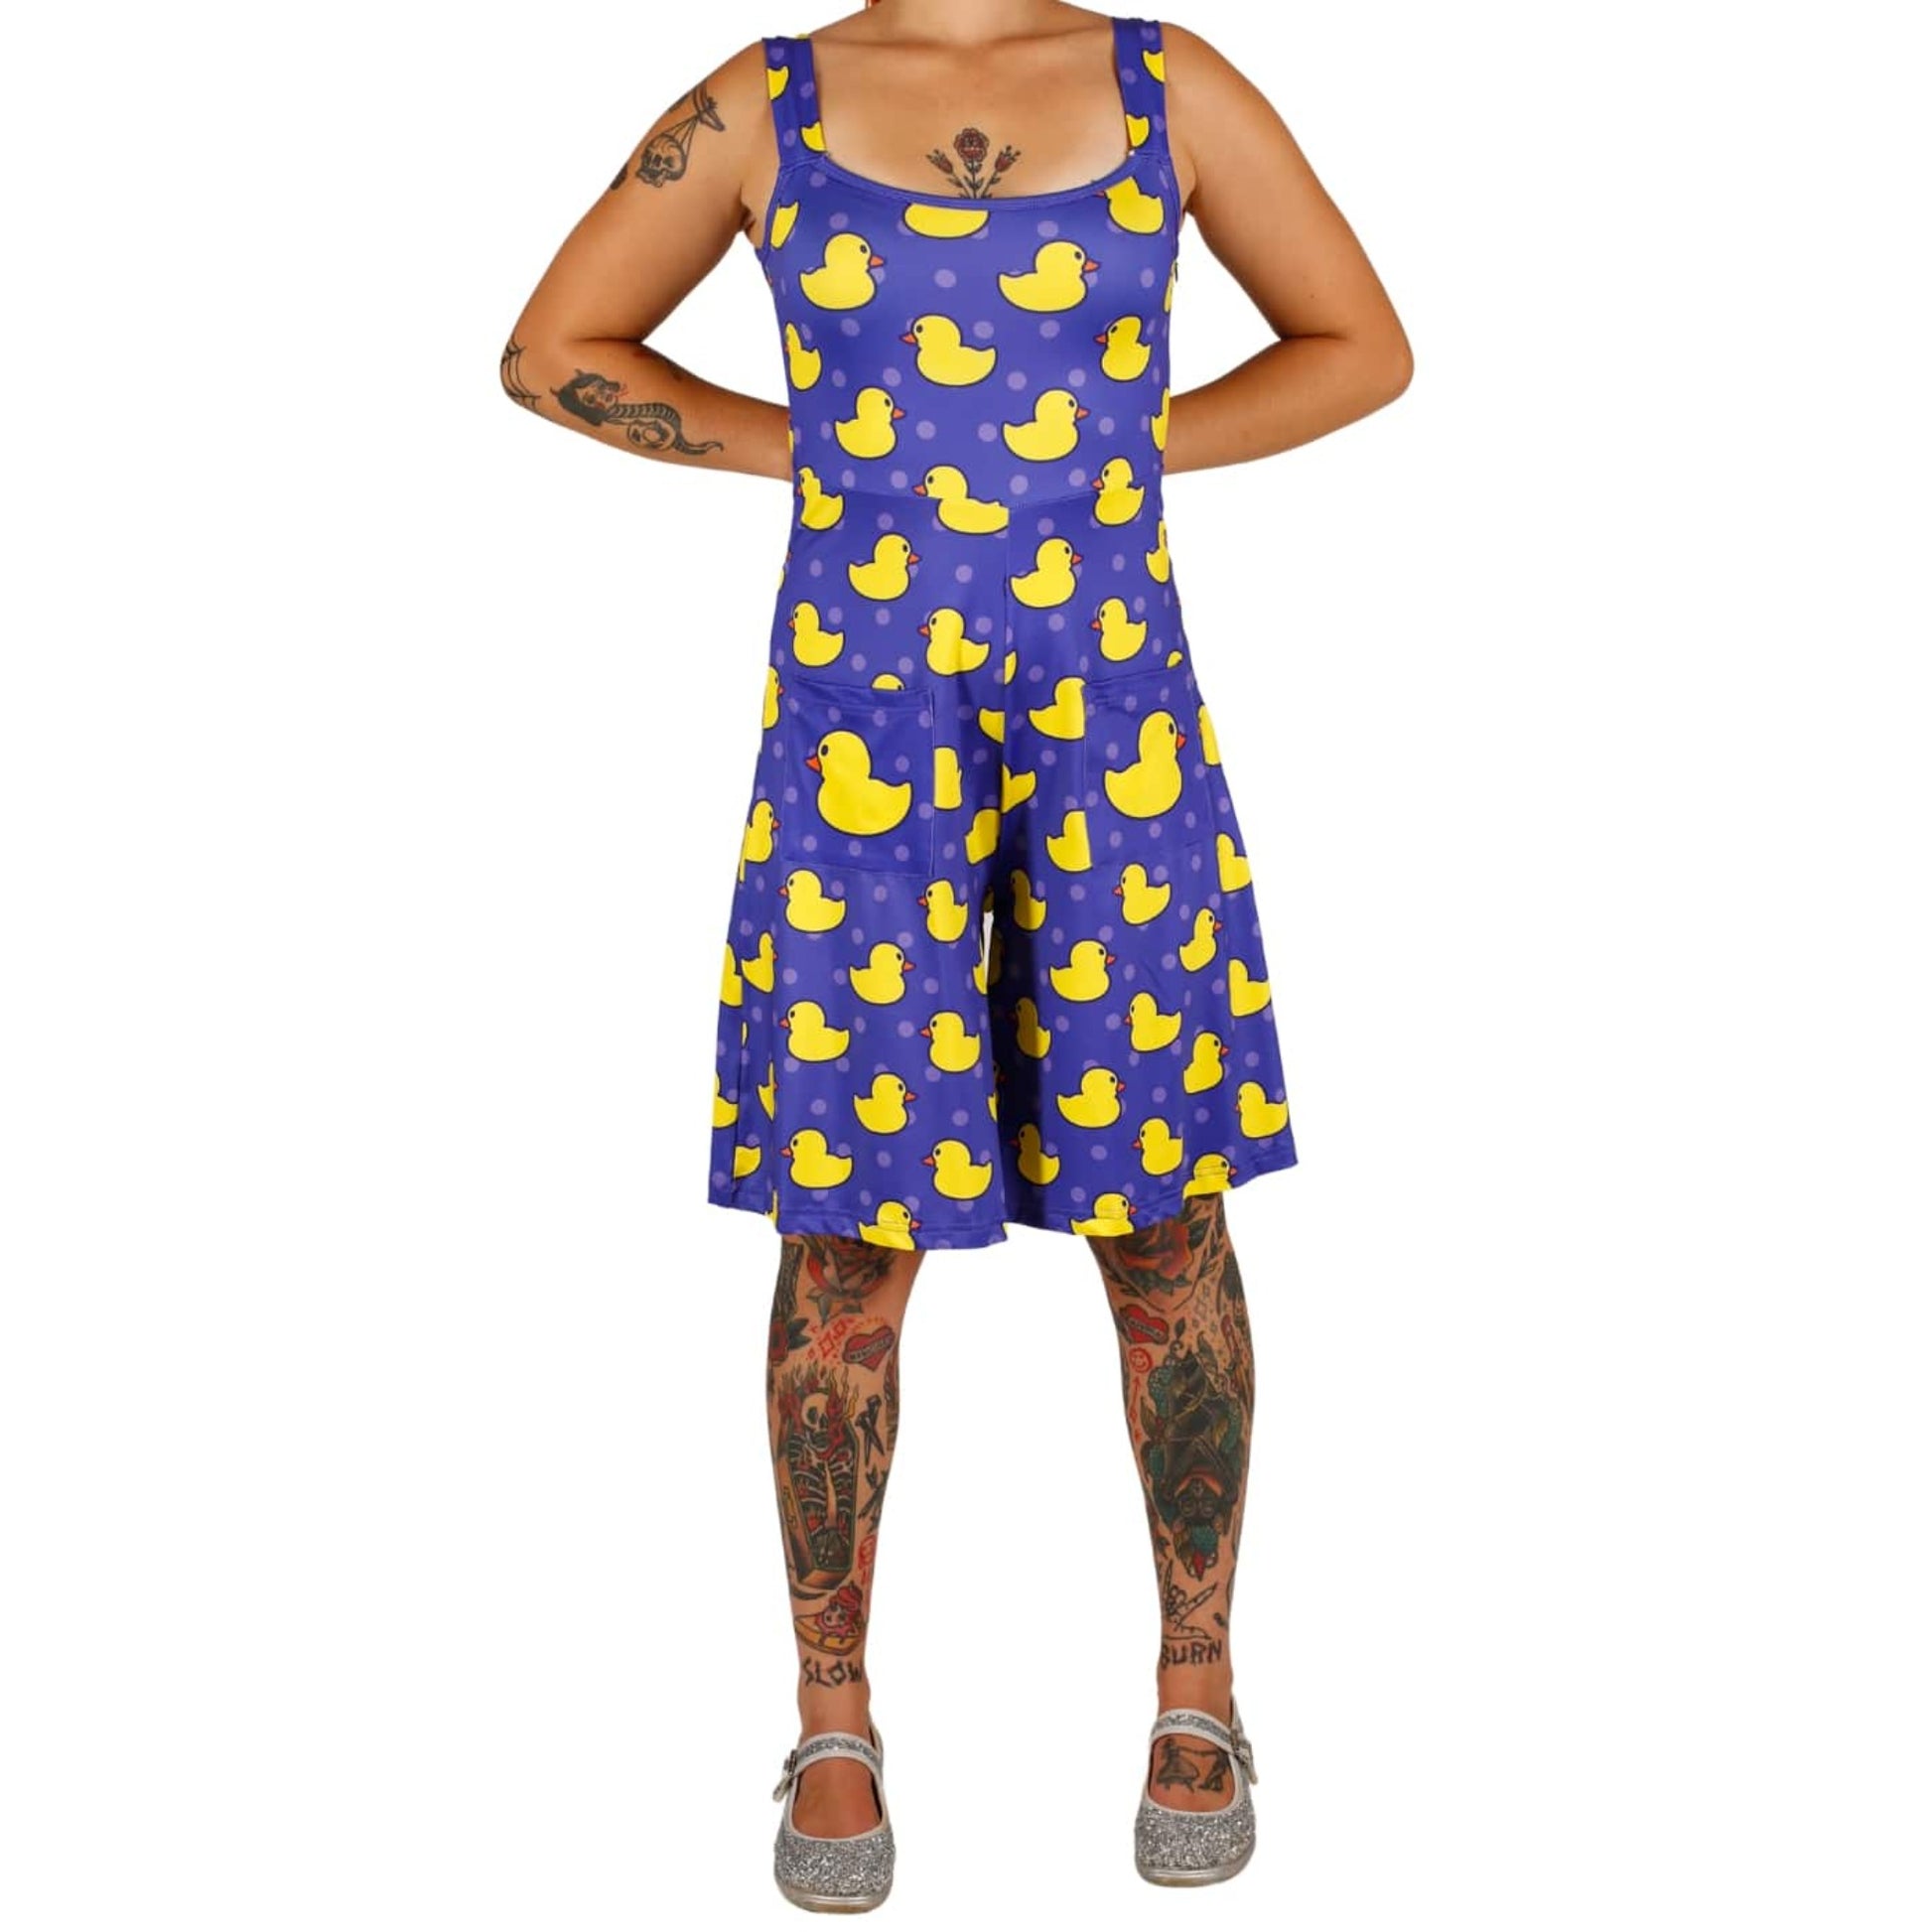 Yellow Ducky Romper by RainbowsAndFairies.com.au (Rubber Ducky - Sesame Street - Playsuit - Overalls - Shorts - Kitsch - Rockabilly) - SKU: CL_ROMPR_DUCKY_YEL - Pic-01